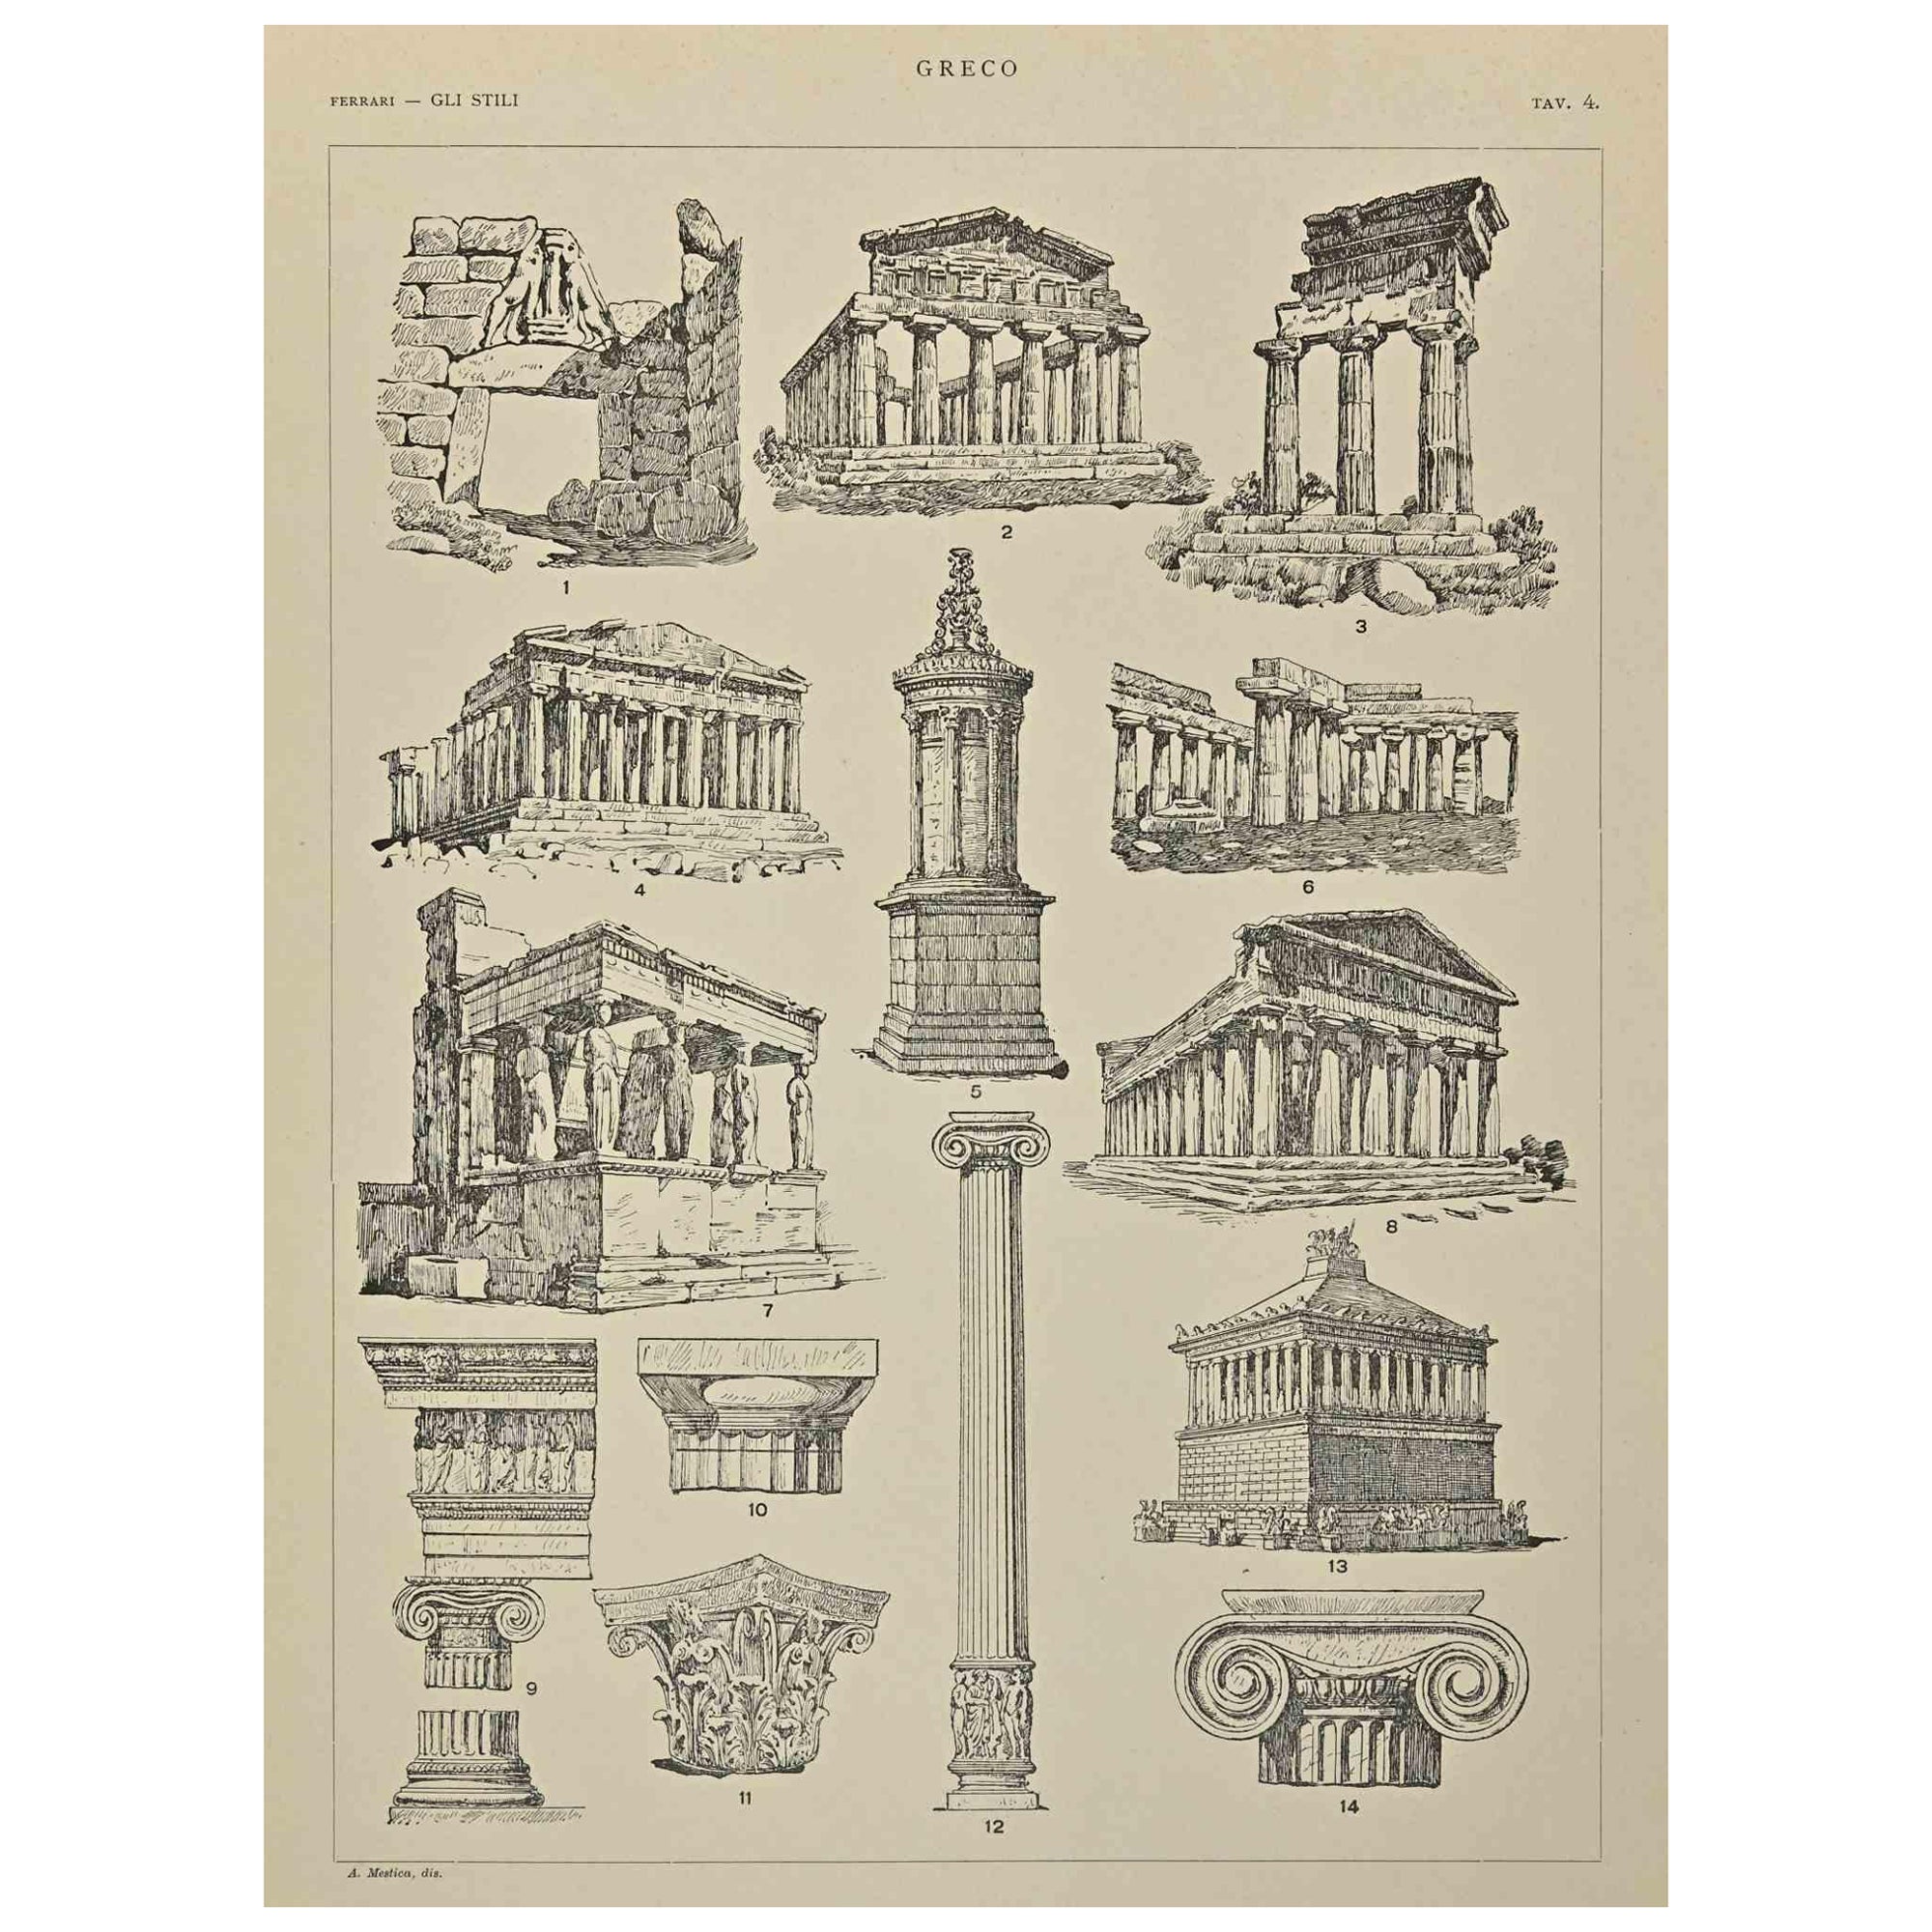 Greek Decorative Style is a print on ivory paper realized by Andrea Alessio in the early 20th Century.

Signed on the plate on the lower.

Vintage lithograph.

Very good conditions.

The artwork represents Decorative motifs through well-defined